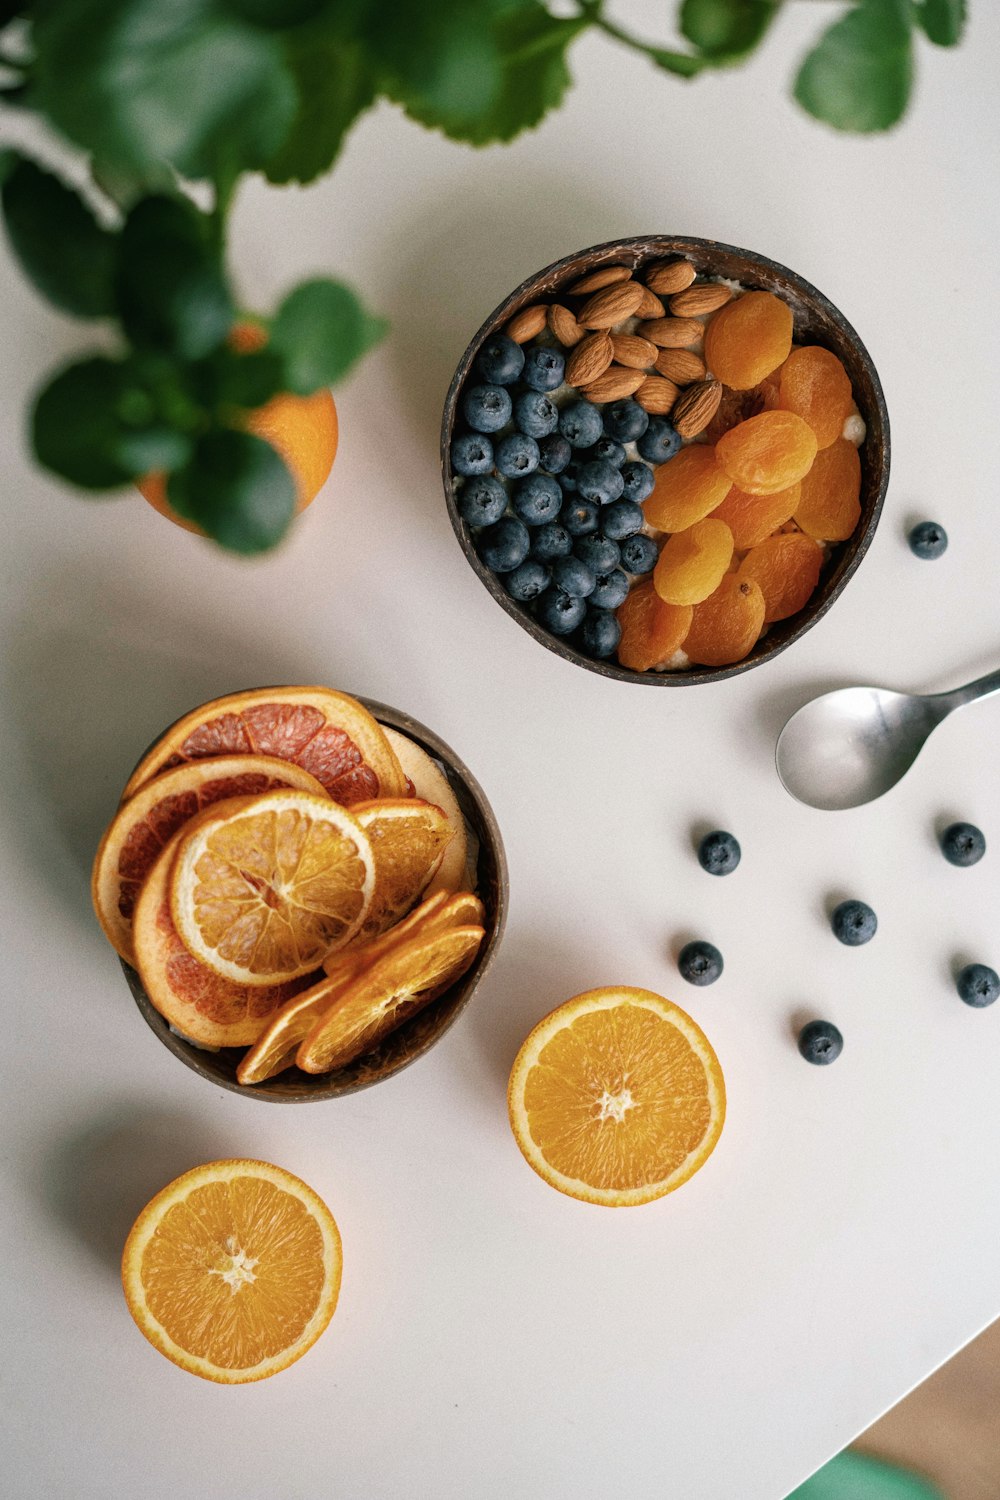 a bowl of oranges, blueberries, and almonds on a table